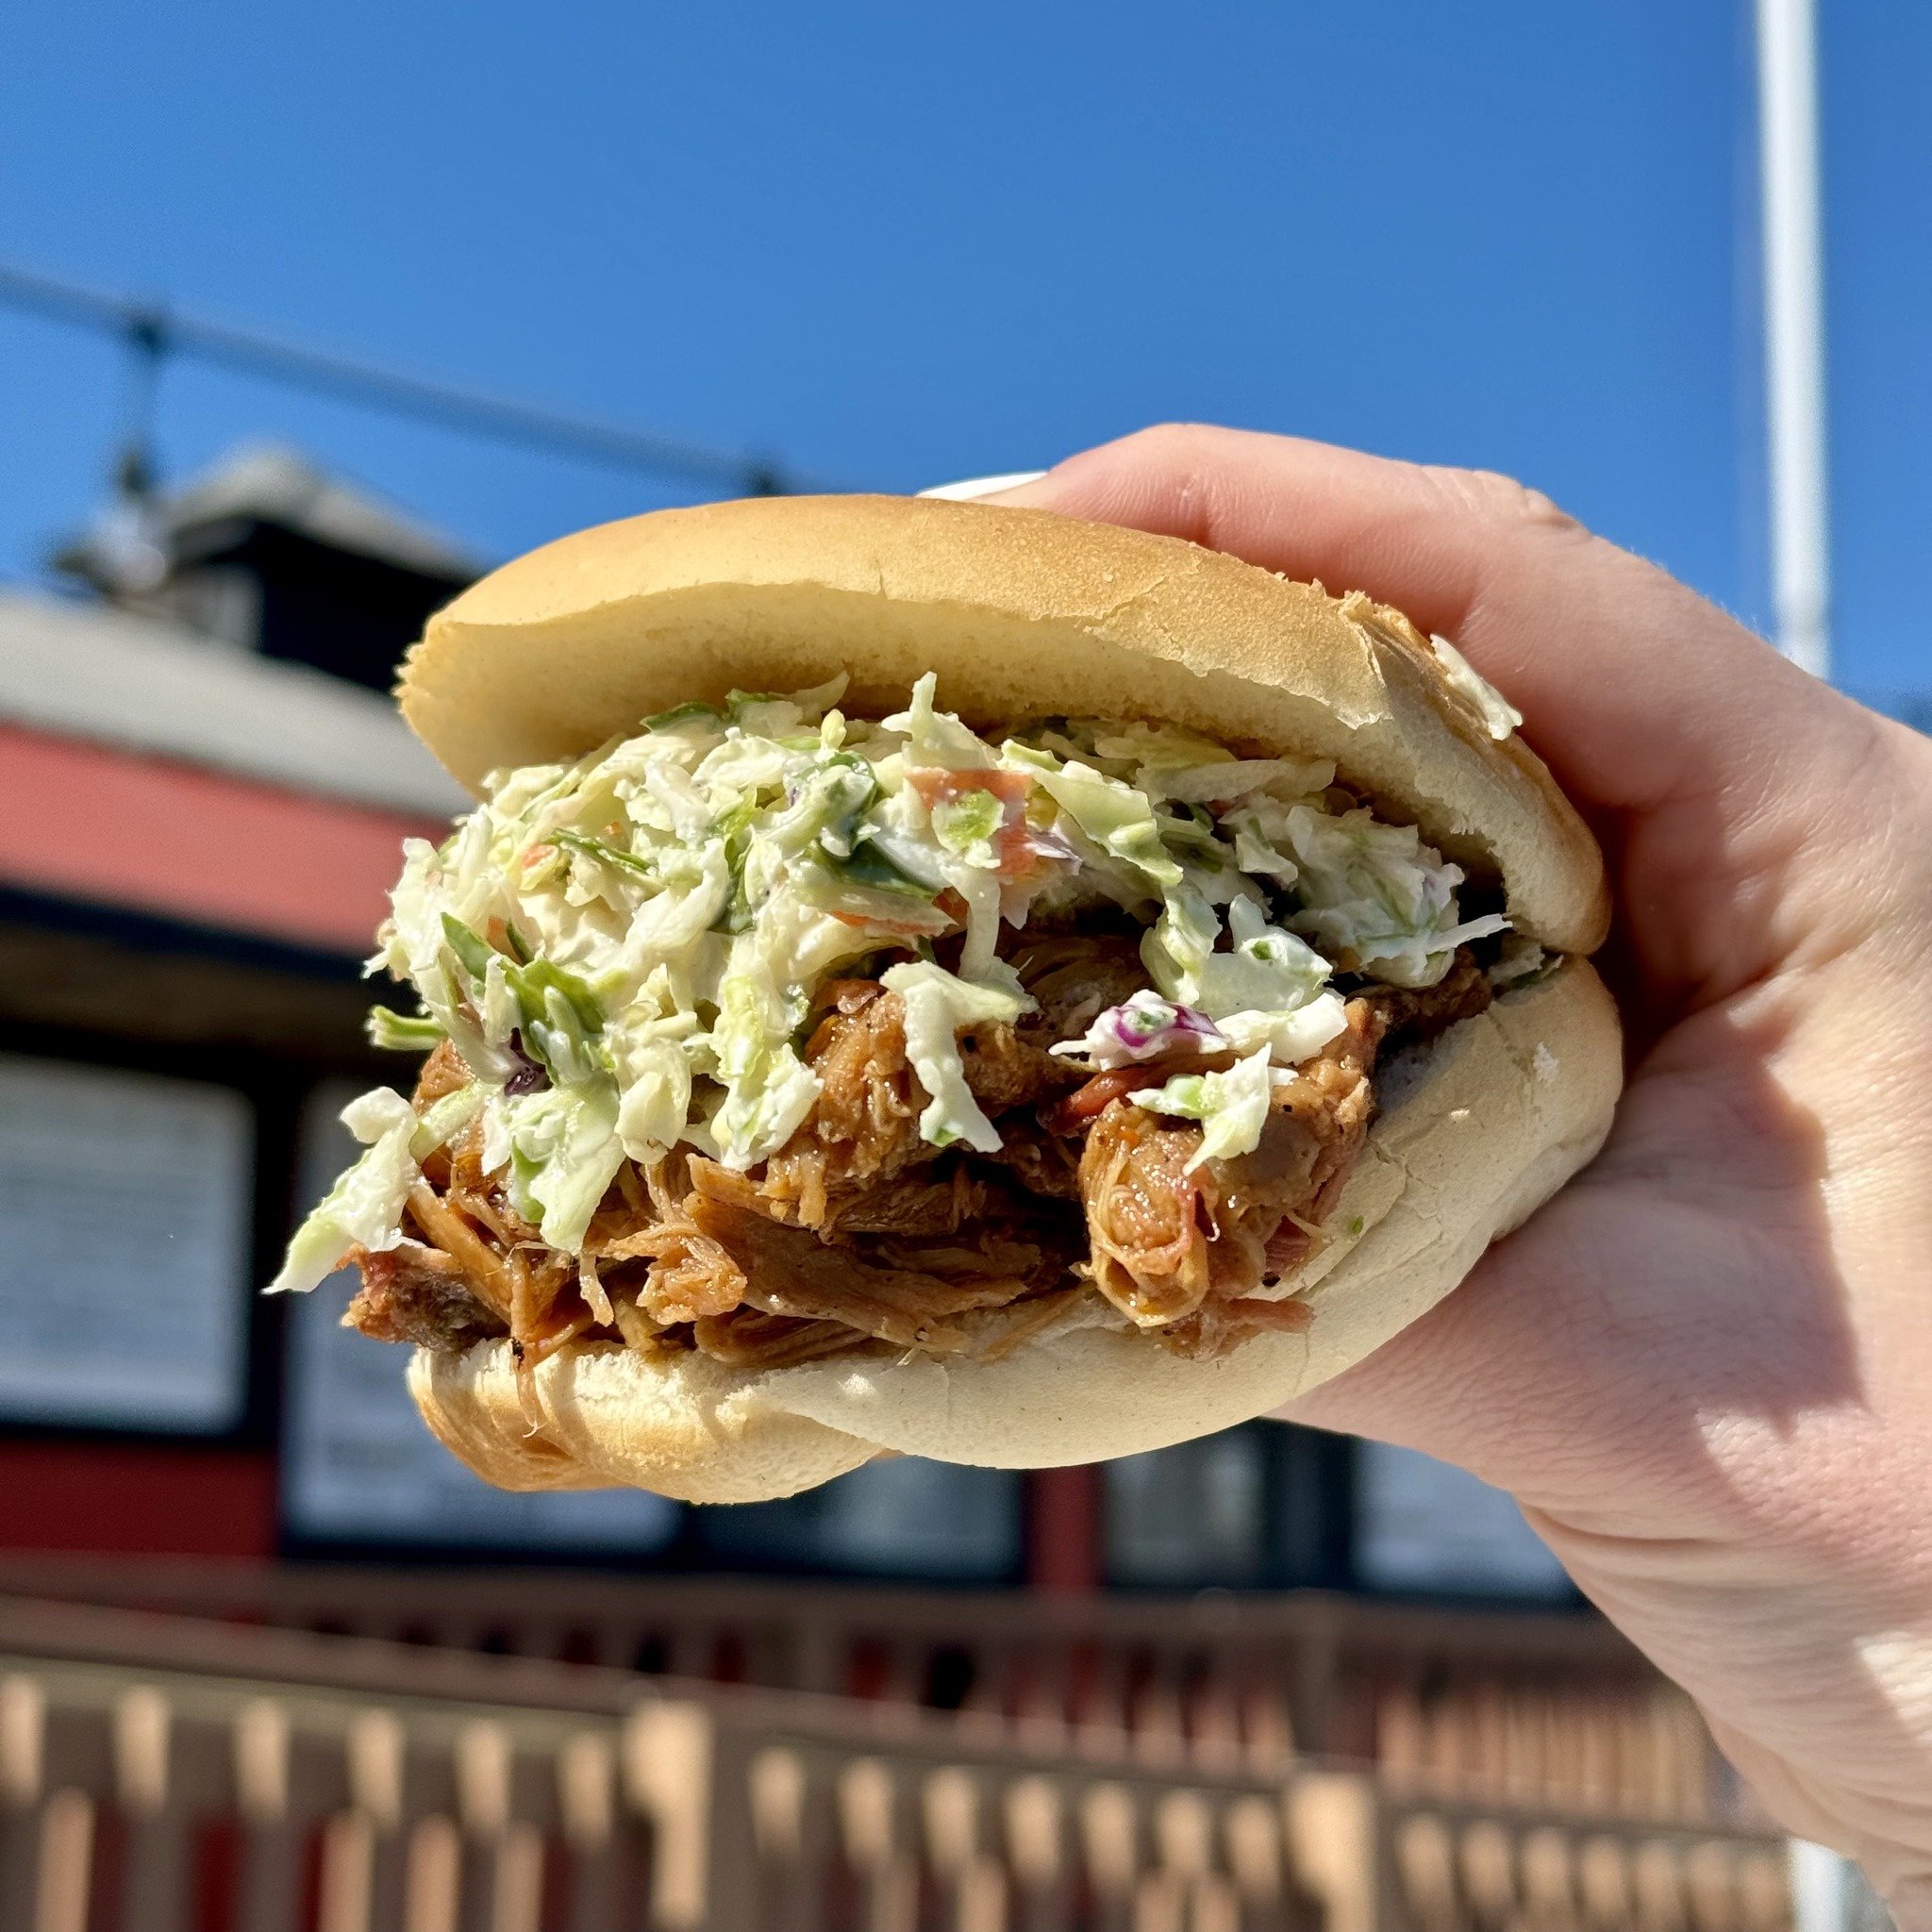 Don't forget our old faithfuls in the feature menu's flashing lights 😉 Serving up Pulled Pork Sandos all sunny weekend long!!☀️